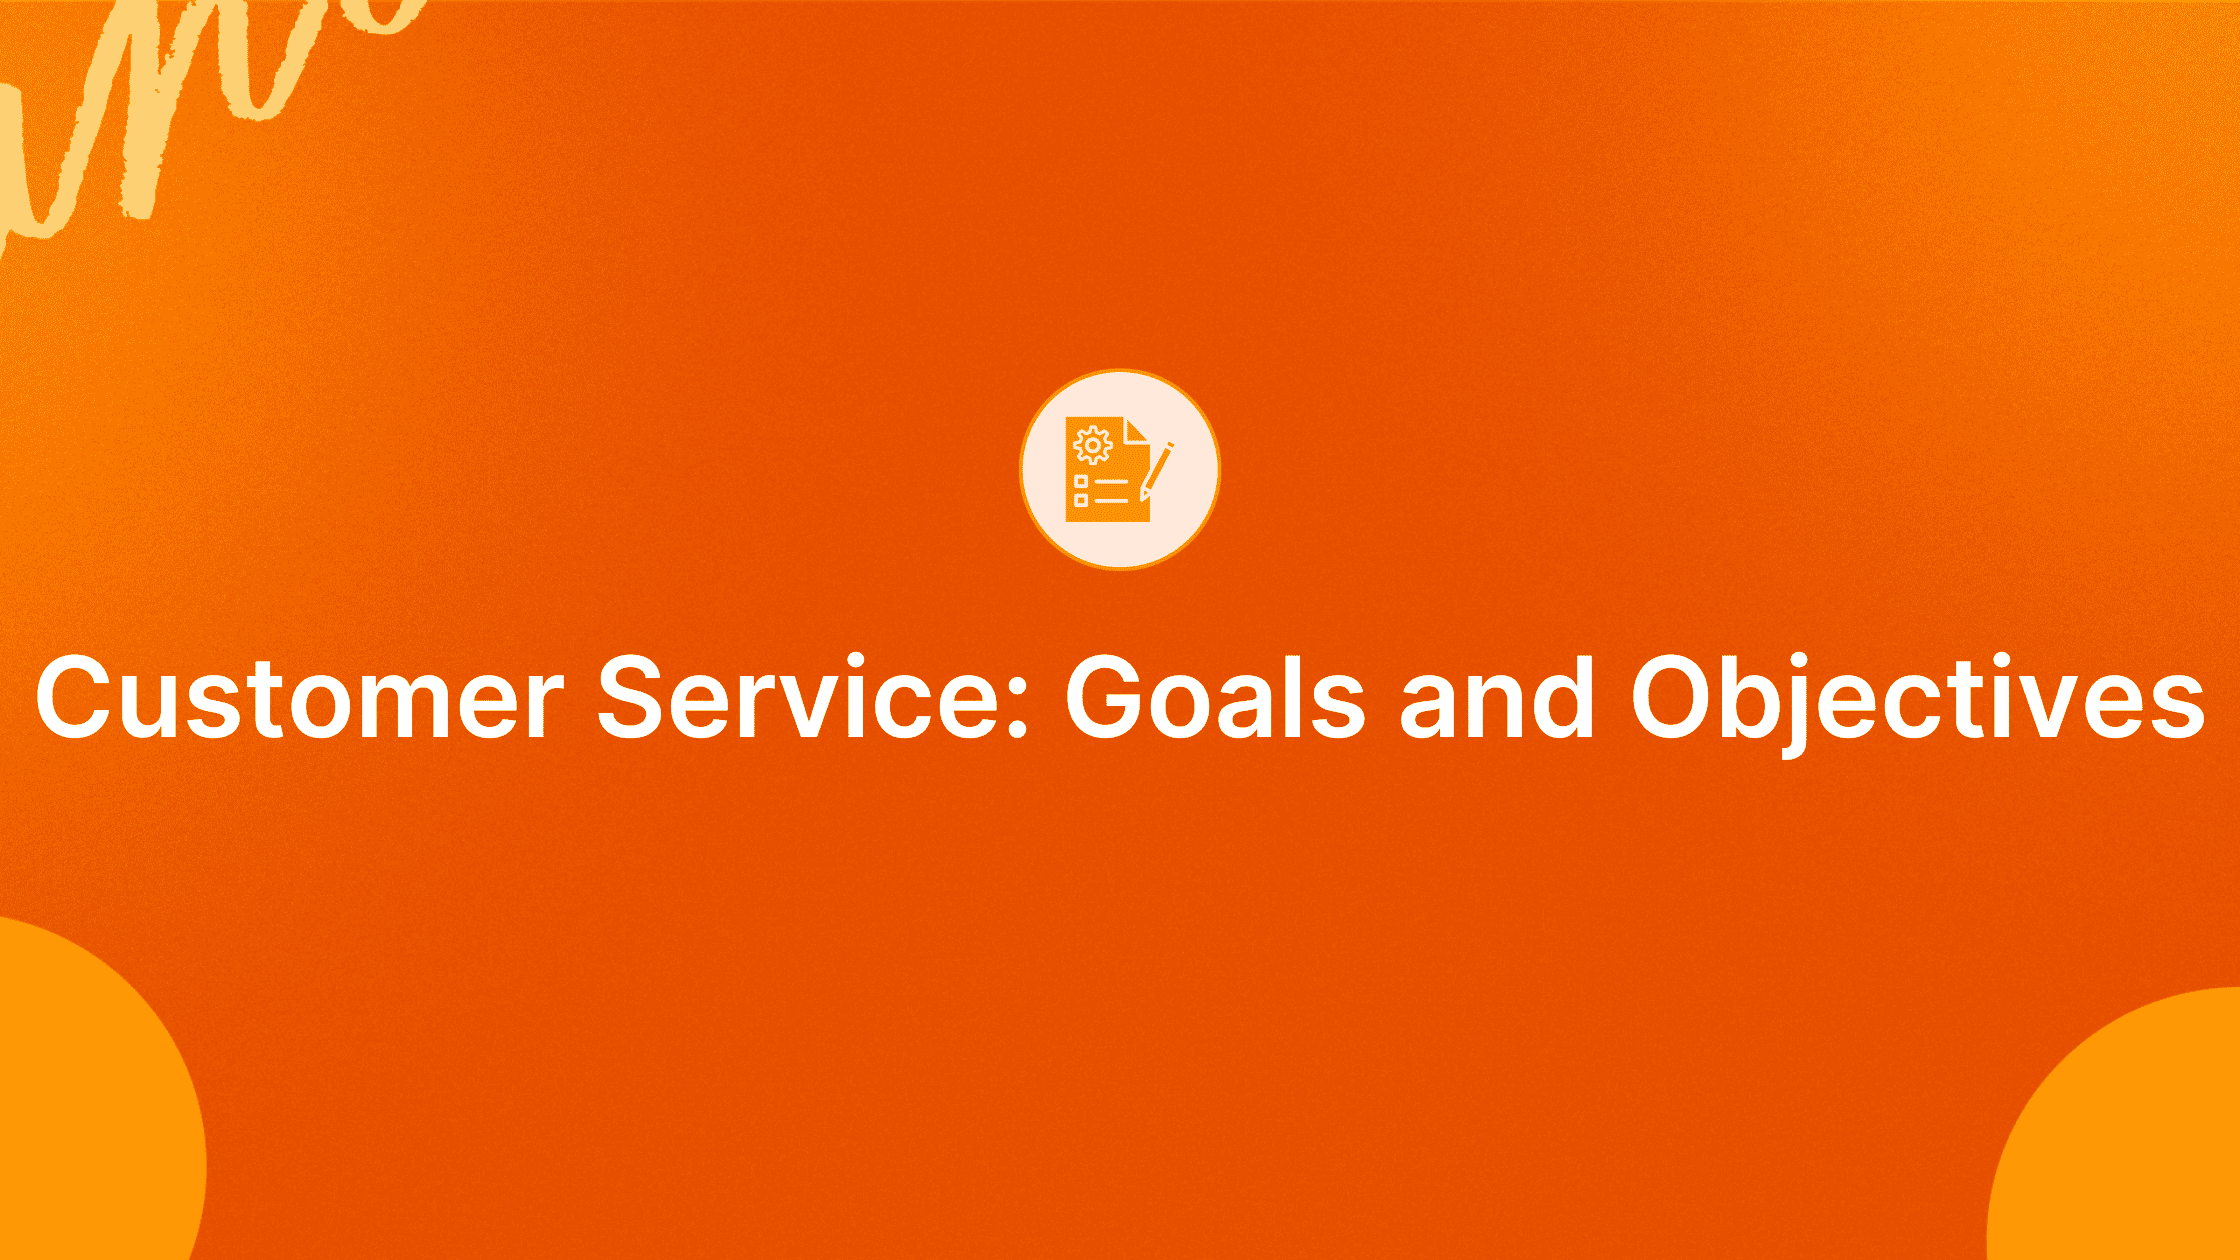 Strategic Customer Service Goals and Objectives to Master